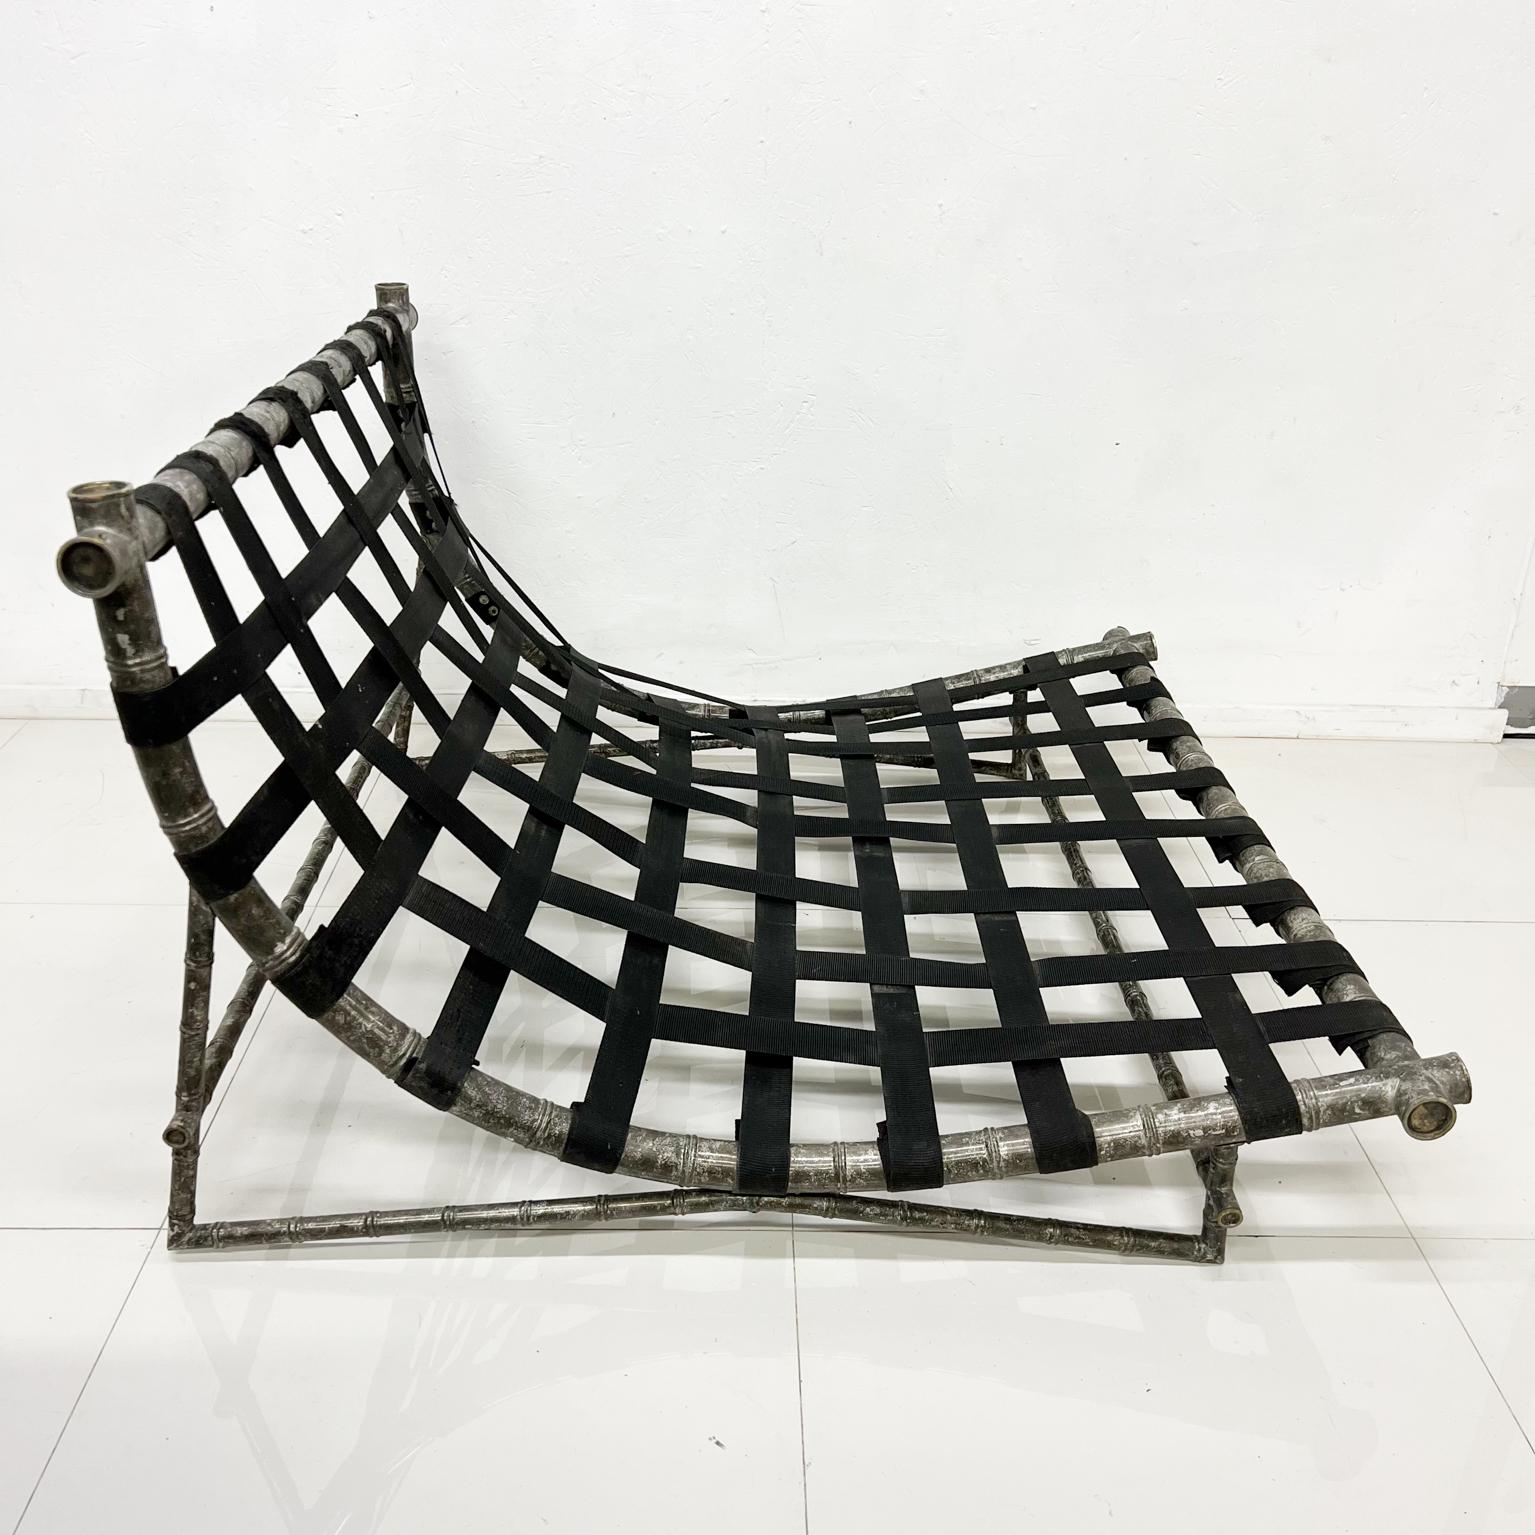 1960s Modern Contoured Low Chaise Lounge chair from Mexico City
Faux Bamboo and Aluminum
Era of Arturo Pani. 
No label.
28.5 h x 45.25 w x 45.5 d
Unrestored preowned original vintage condition
See all images shown.
Delivery to LA and OC